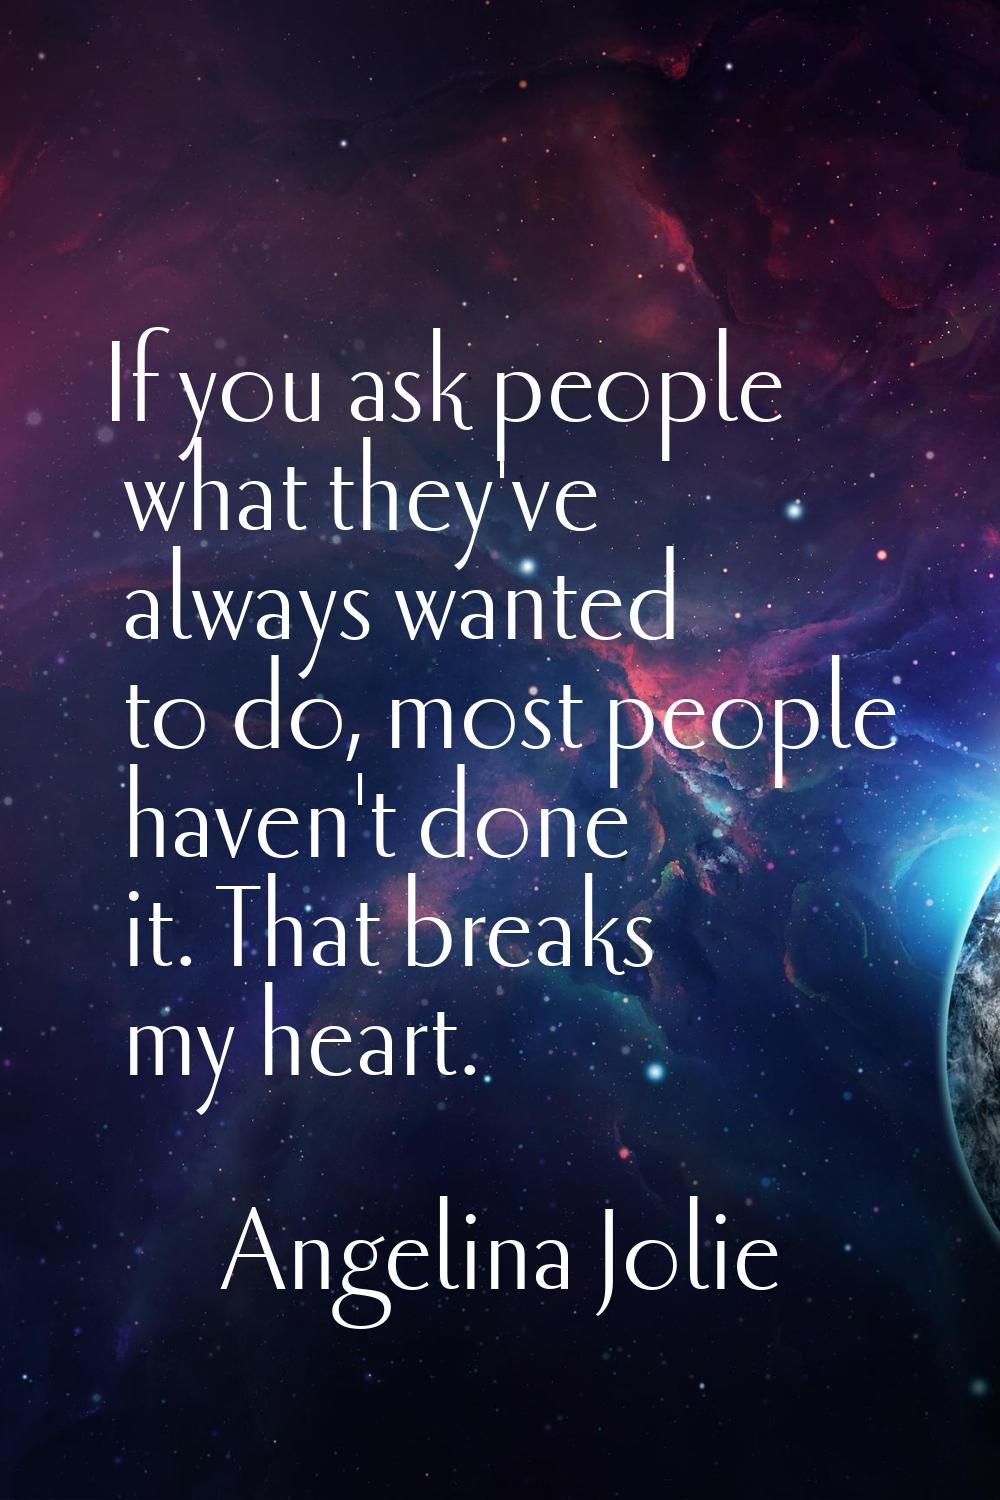 If you ask people what they've always wanted to do, most people haven't done it. That breaks my hea